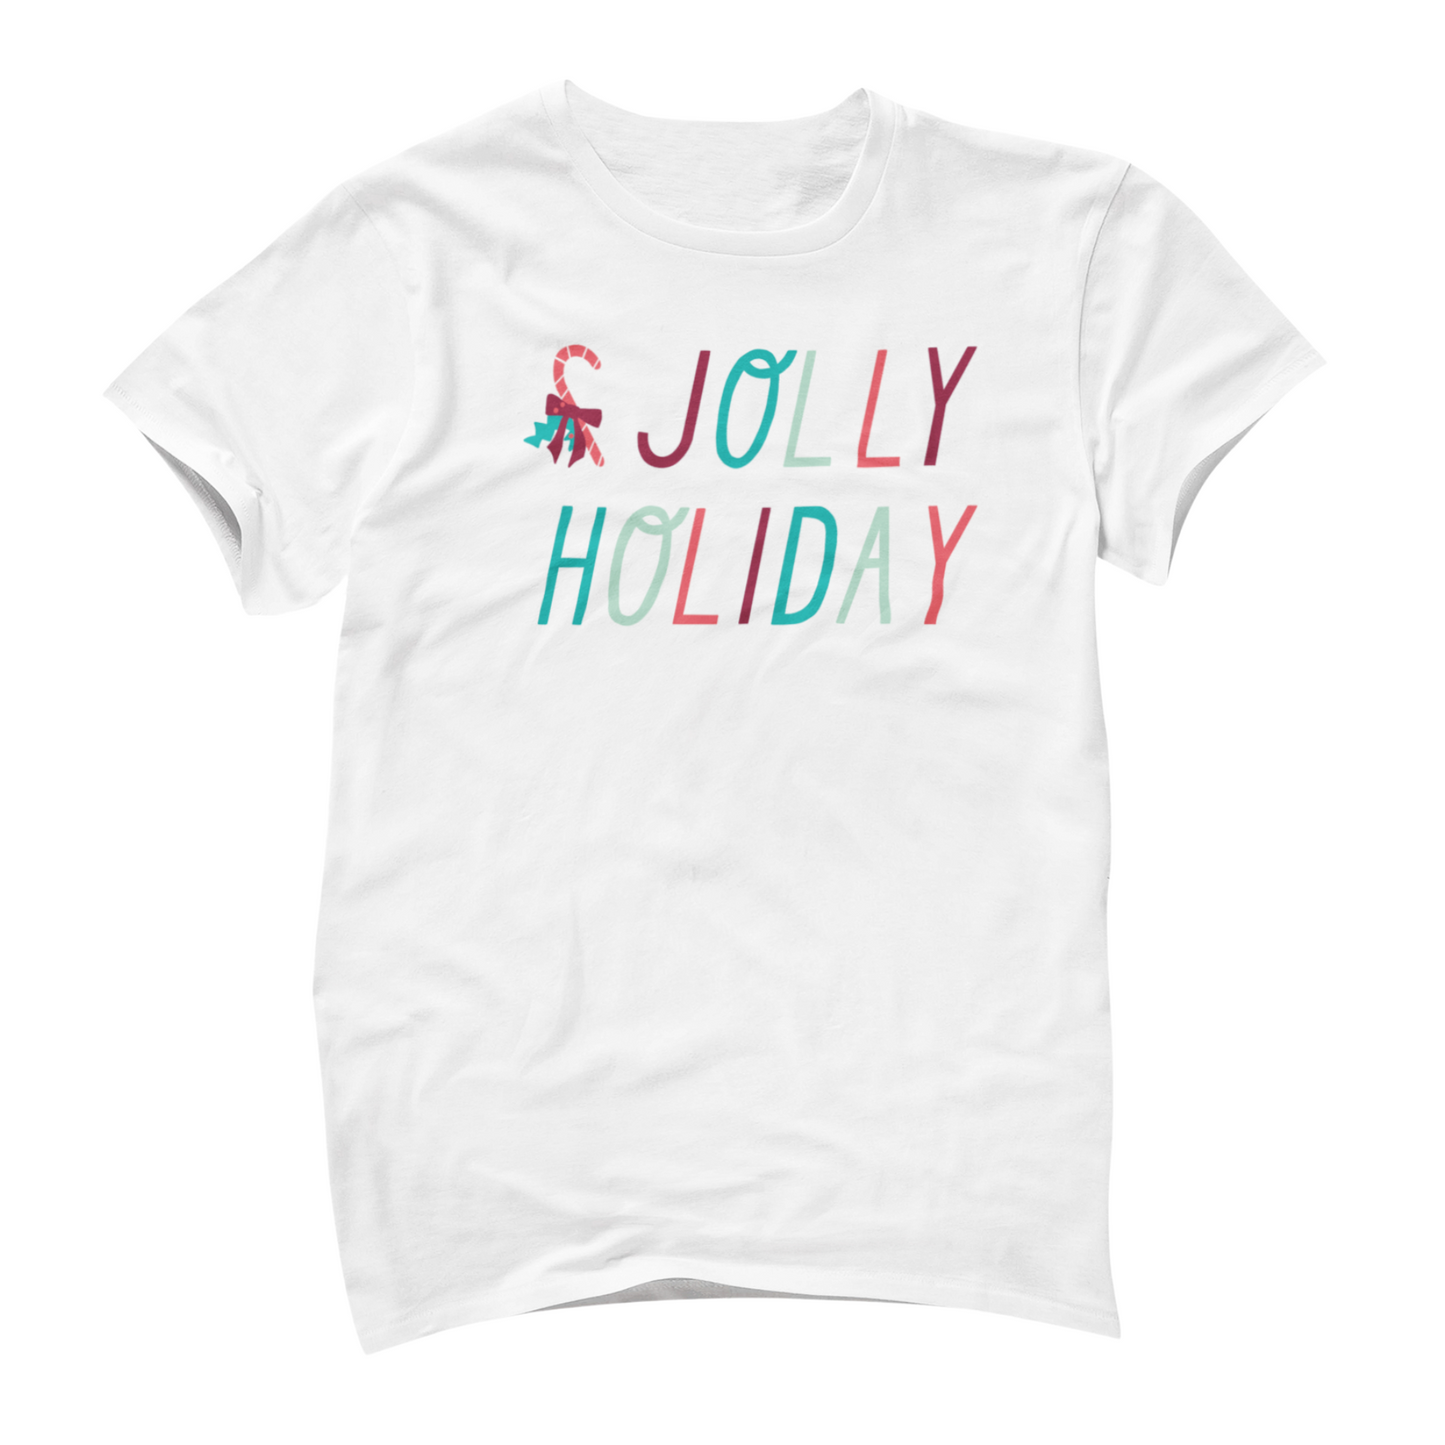 It's a Jolly Holiday Tee